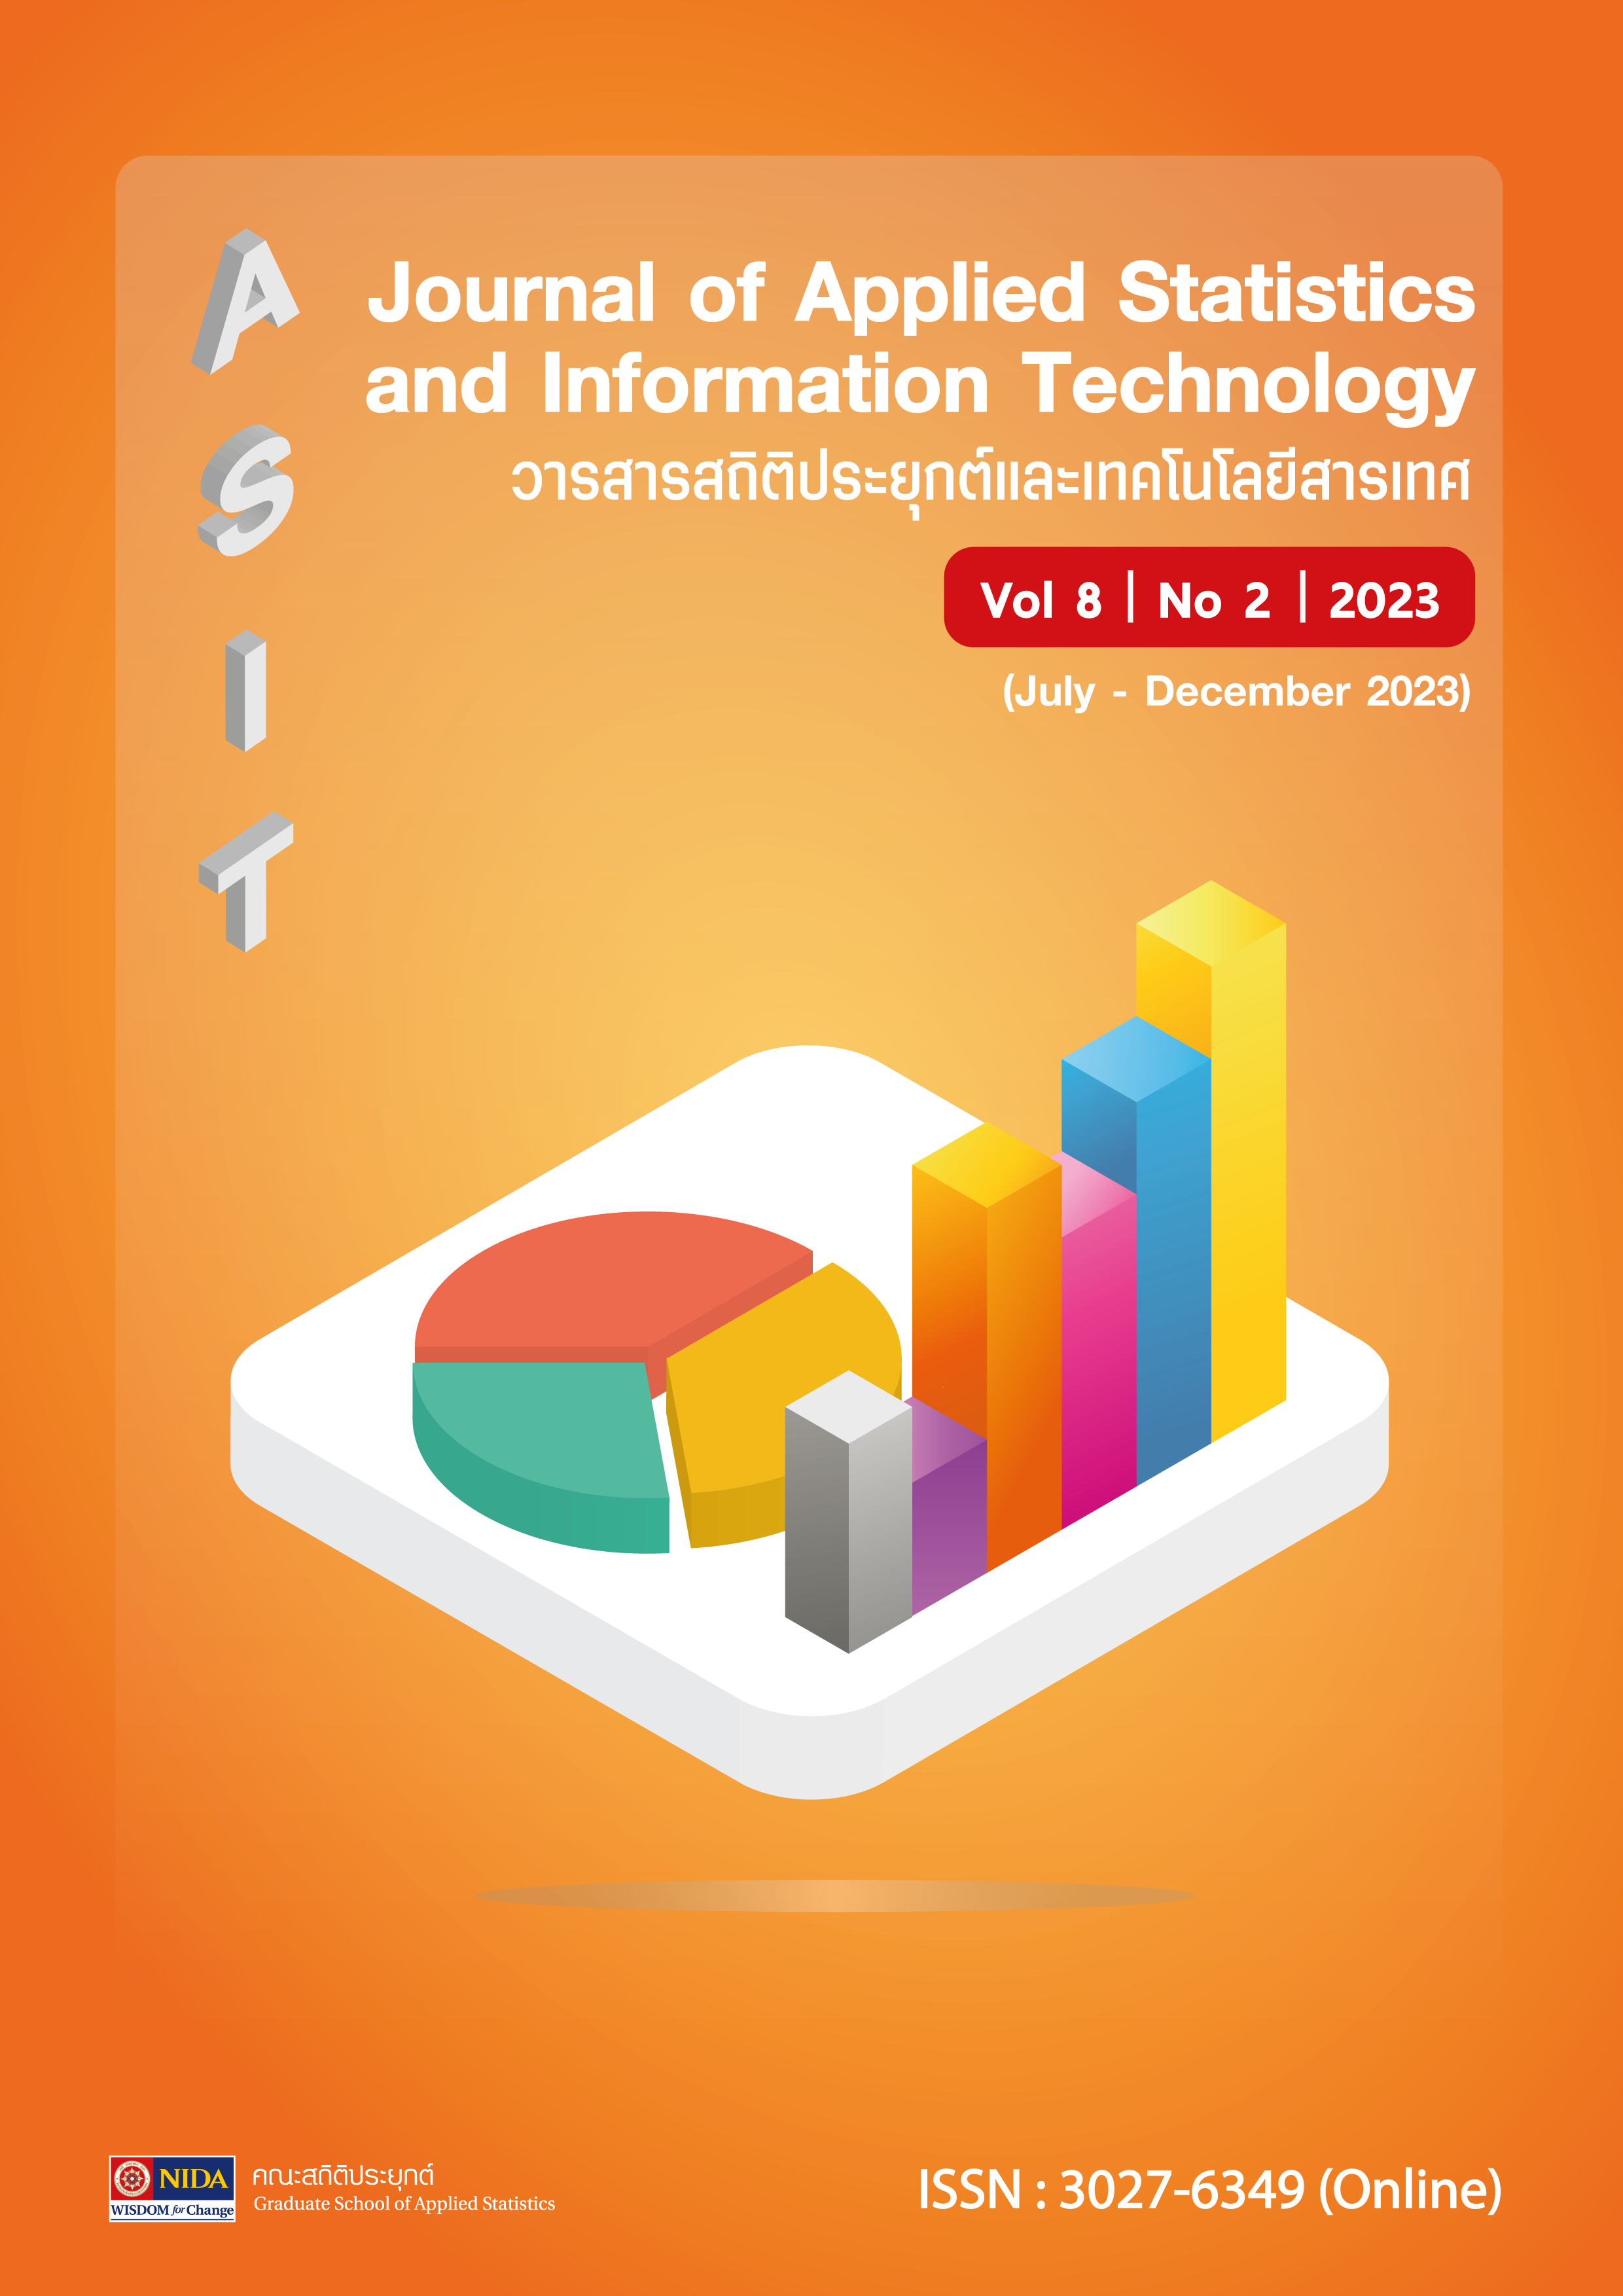 					View Vol. 8 No. 2 (2023): Journal of Applied Statistics and Information Technology Vol. 8 No. 2 (July - December 2023)
				